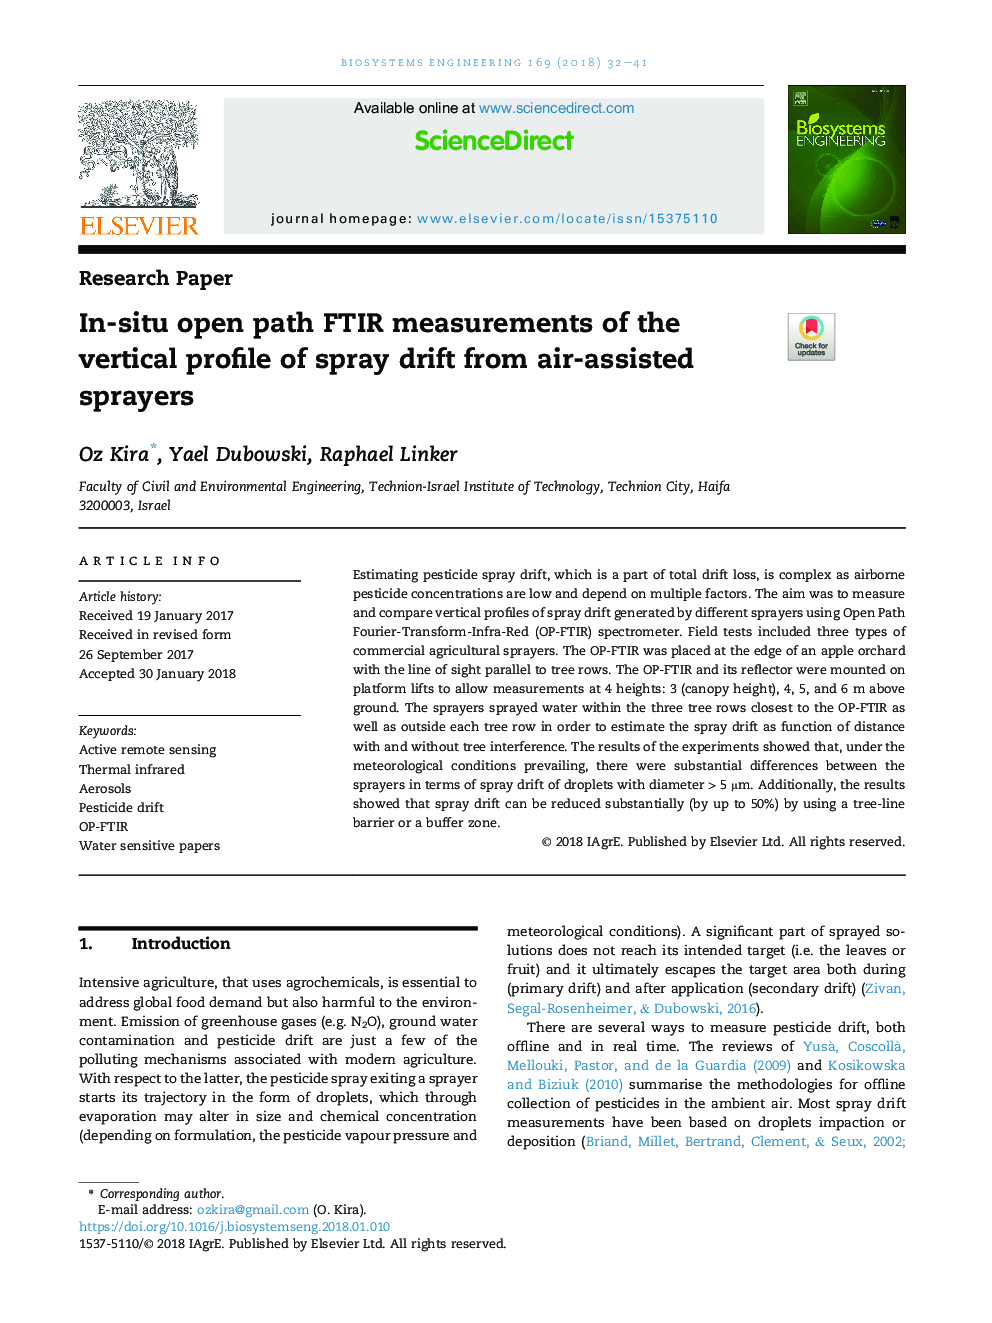 In-situ open path FTIR measurements of the vertical profile of spray drift from air-assisted sprayers